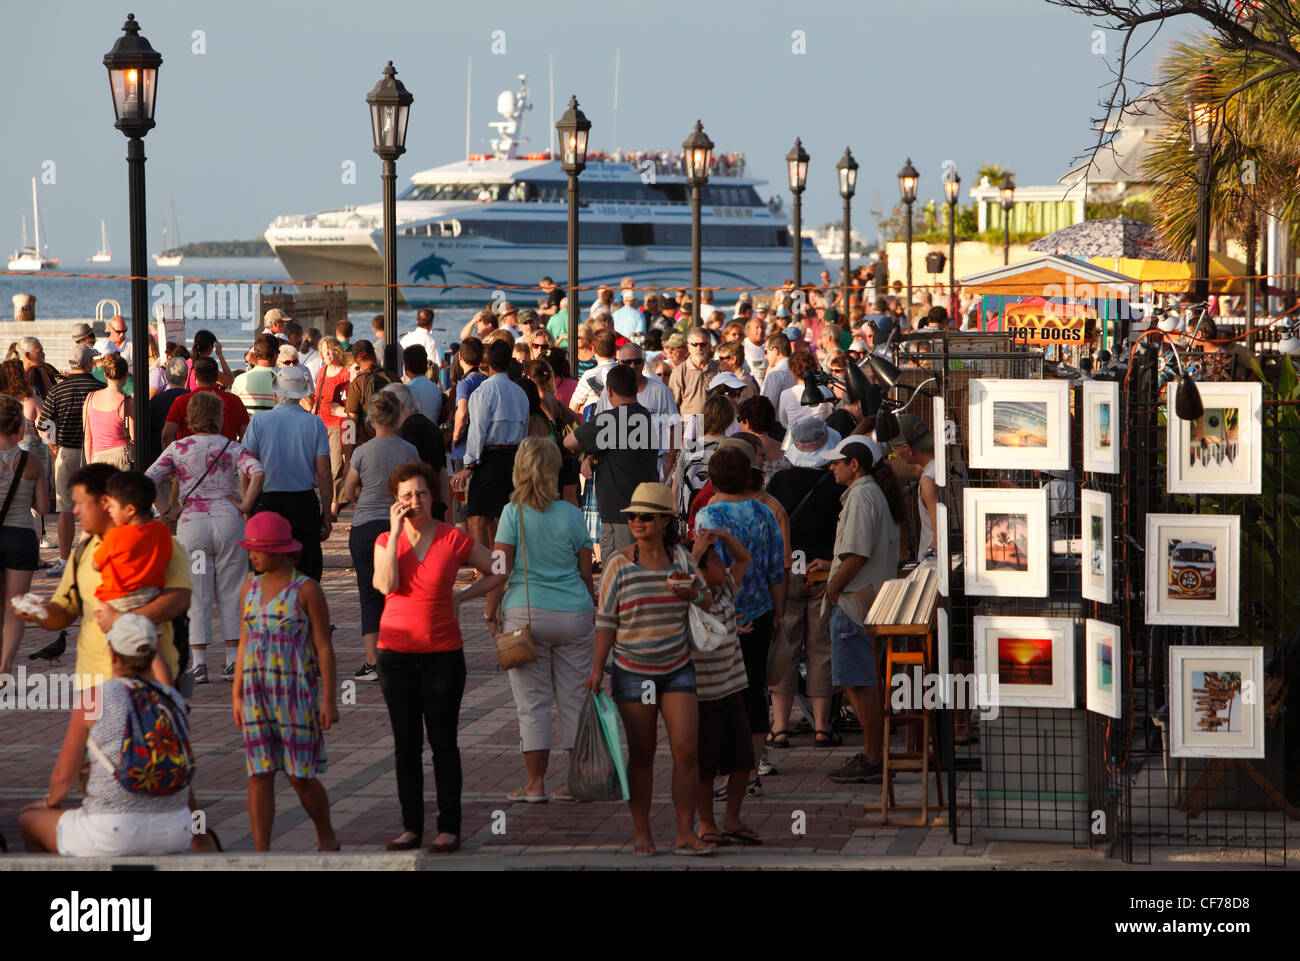 A crowd near sunset at Mallory Square, Key West, Florida Stock Photo